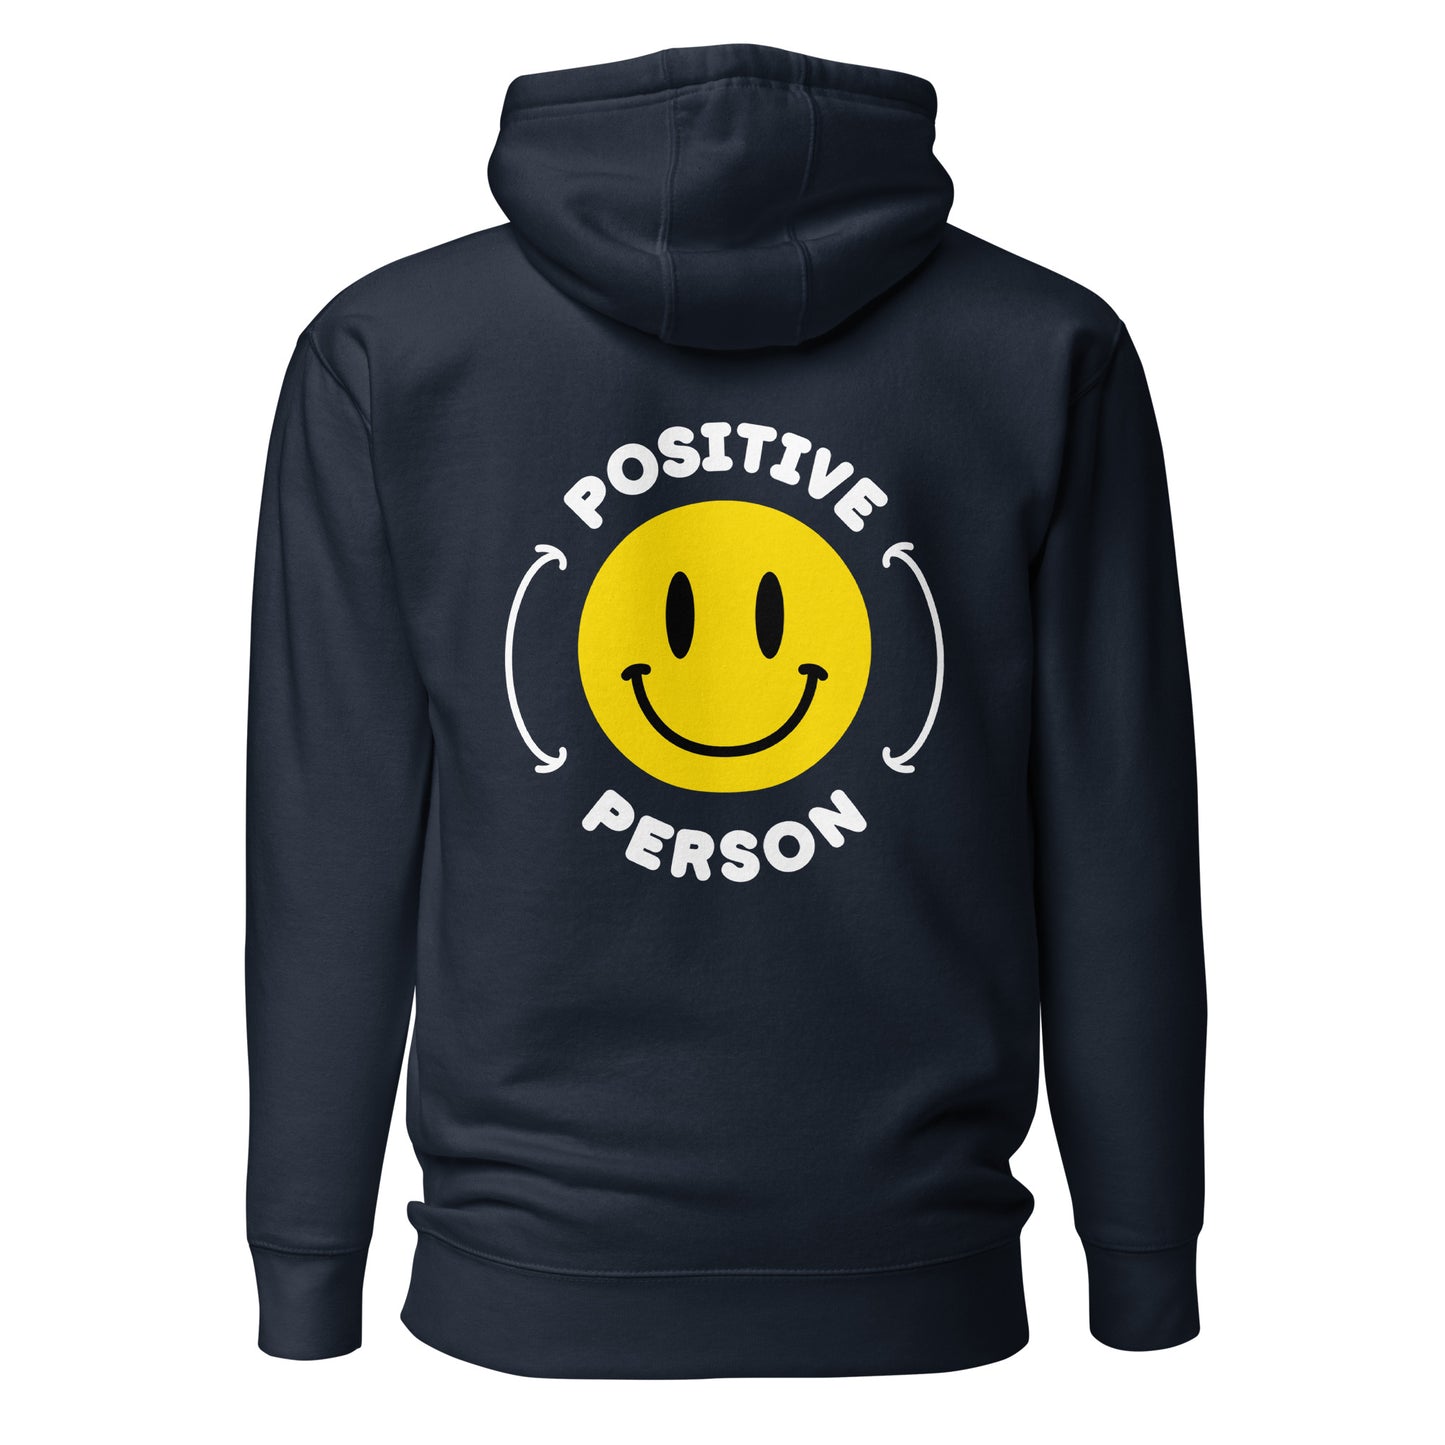 "Positive Person" Hoodie